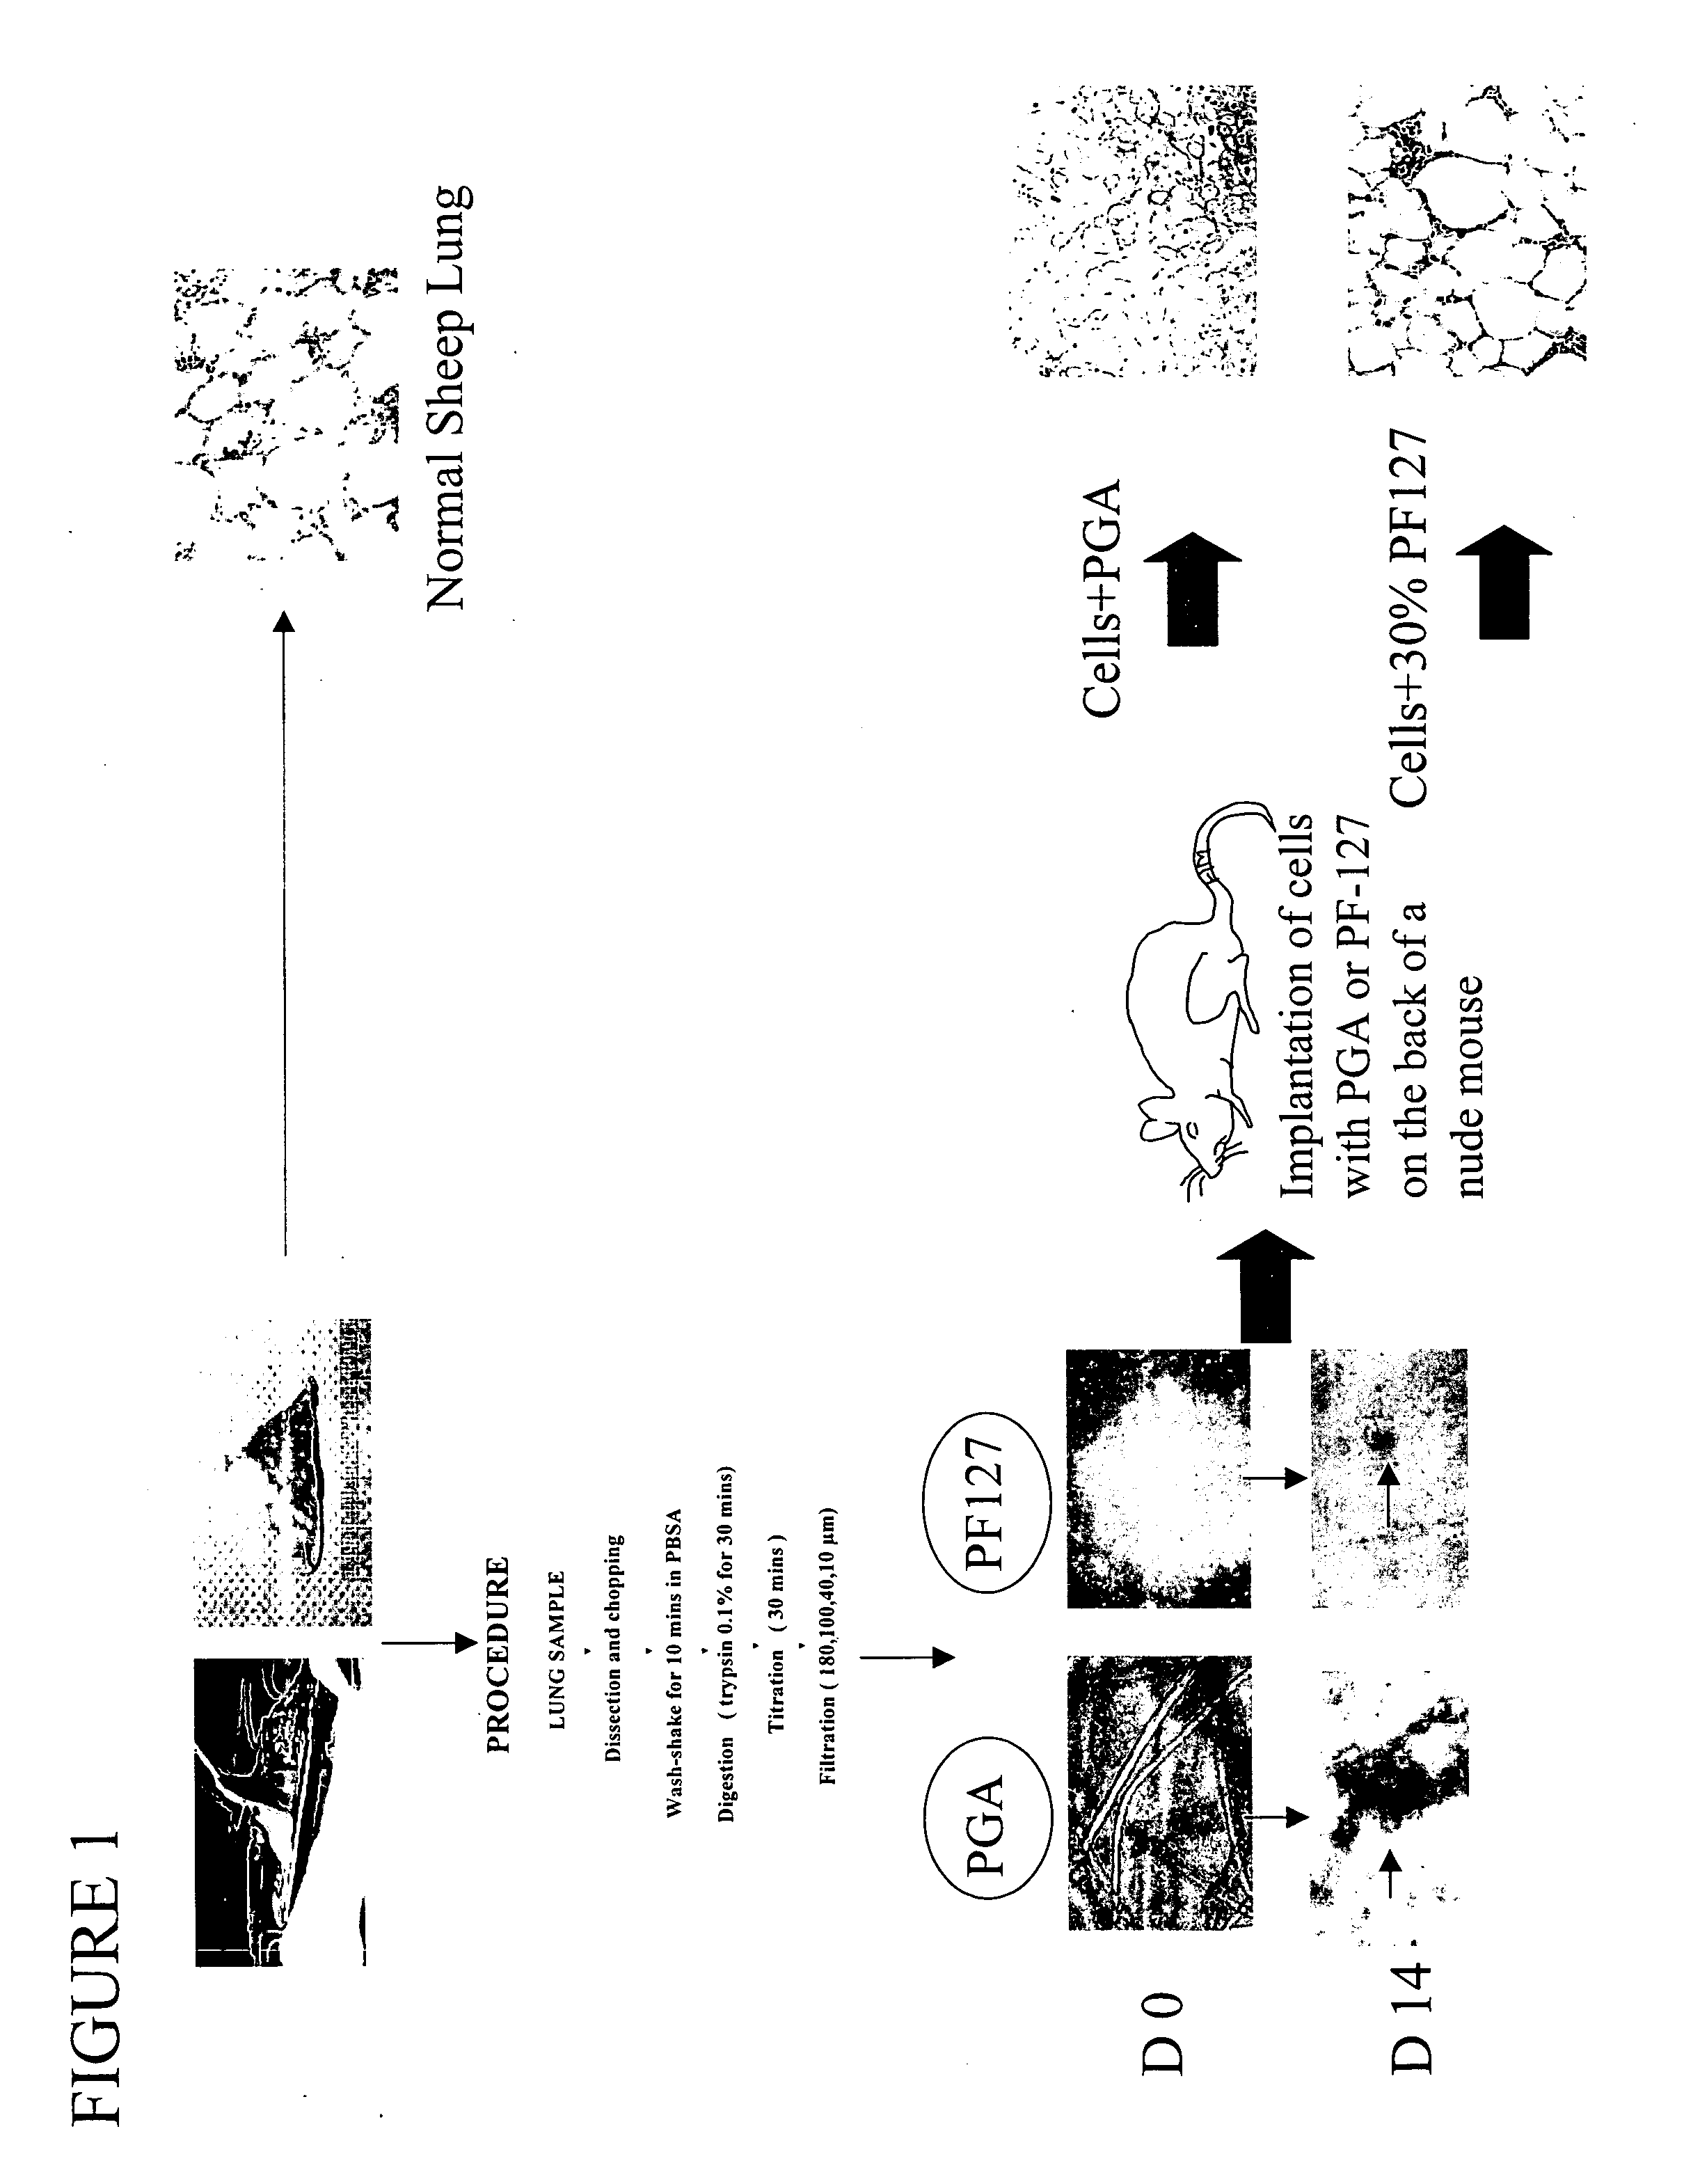 Engineered lung tissue, hydrogel/somatic lung progenitor cell constructs to support tissue growth, and method for making and using same